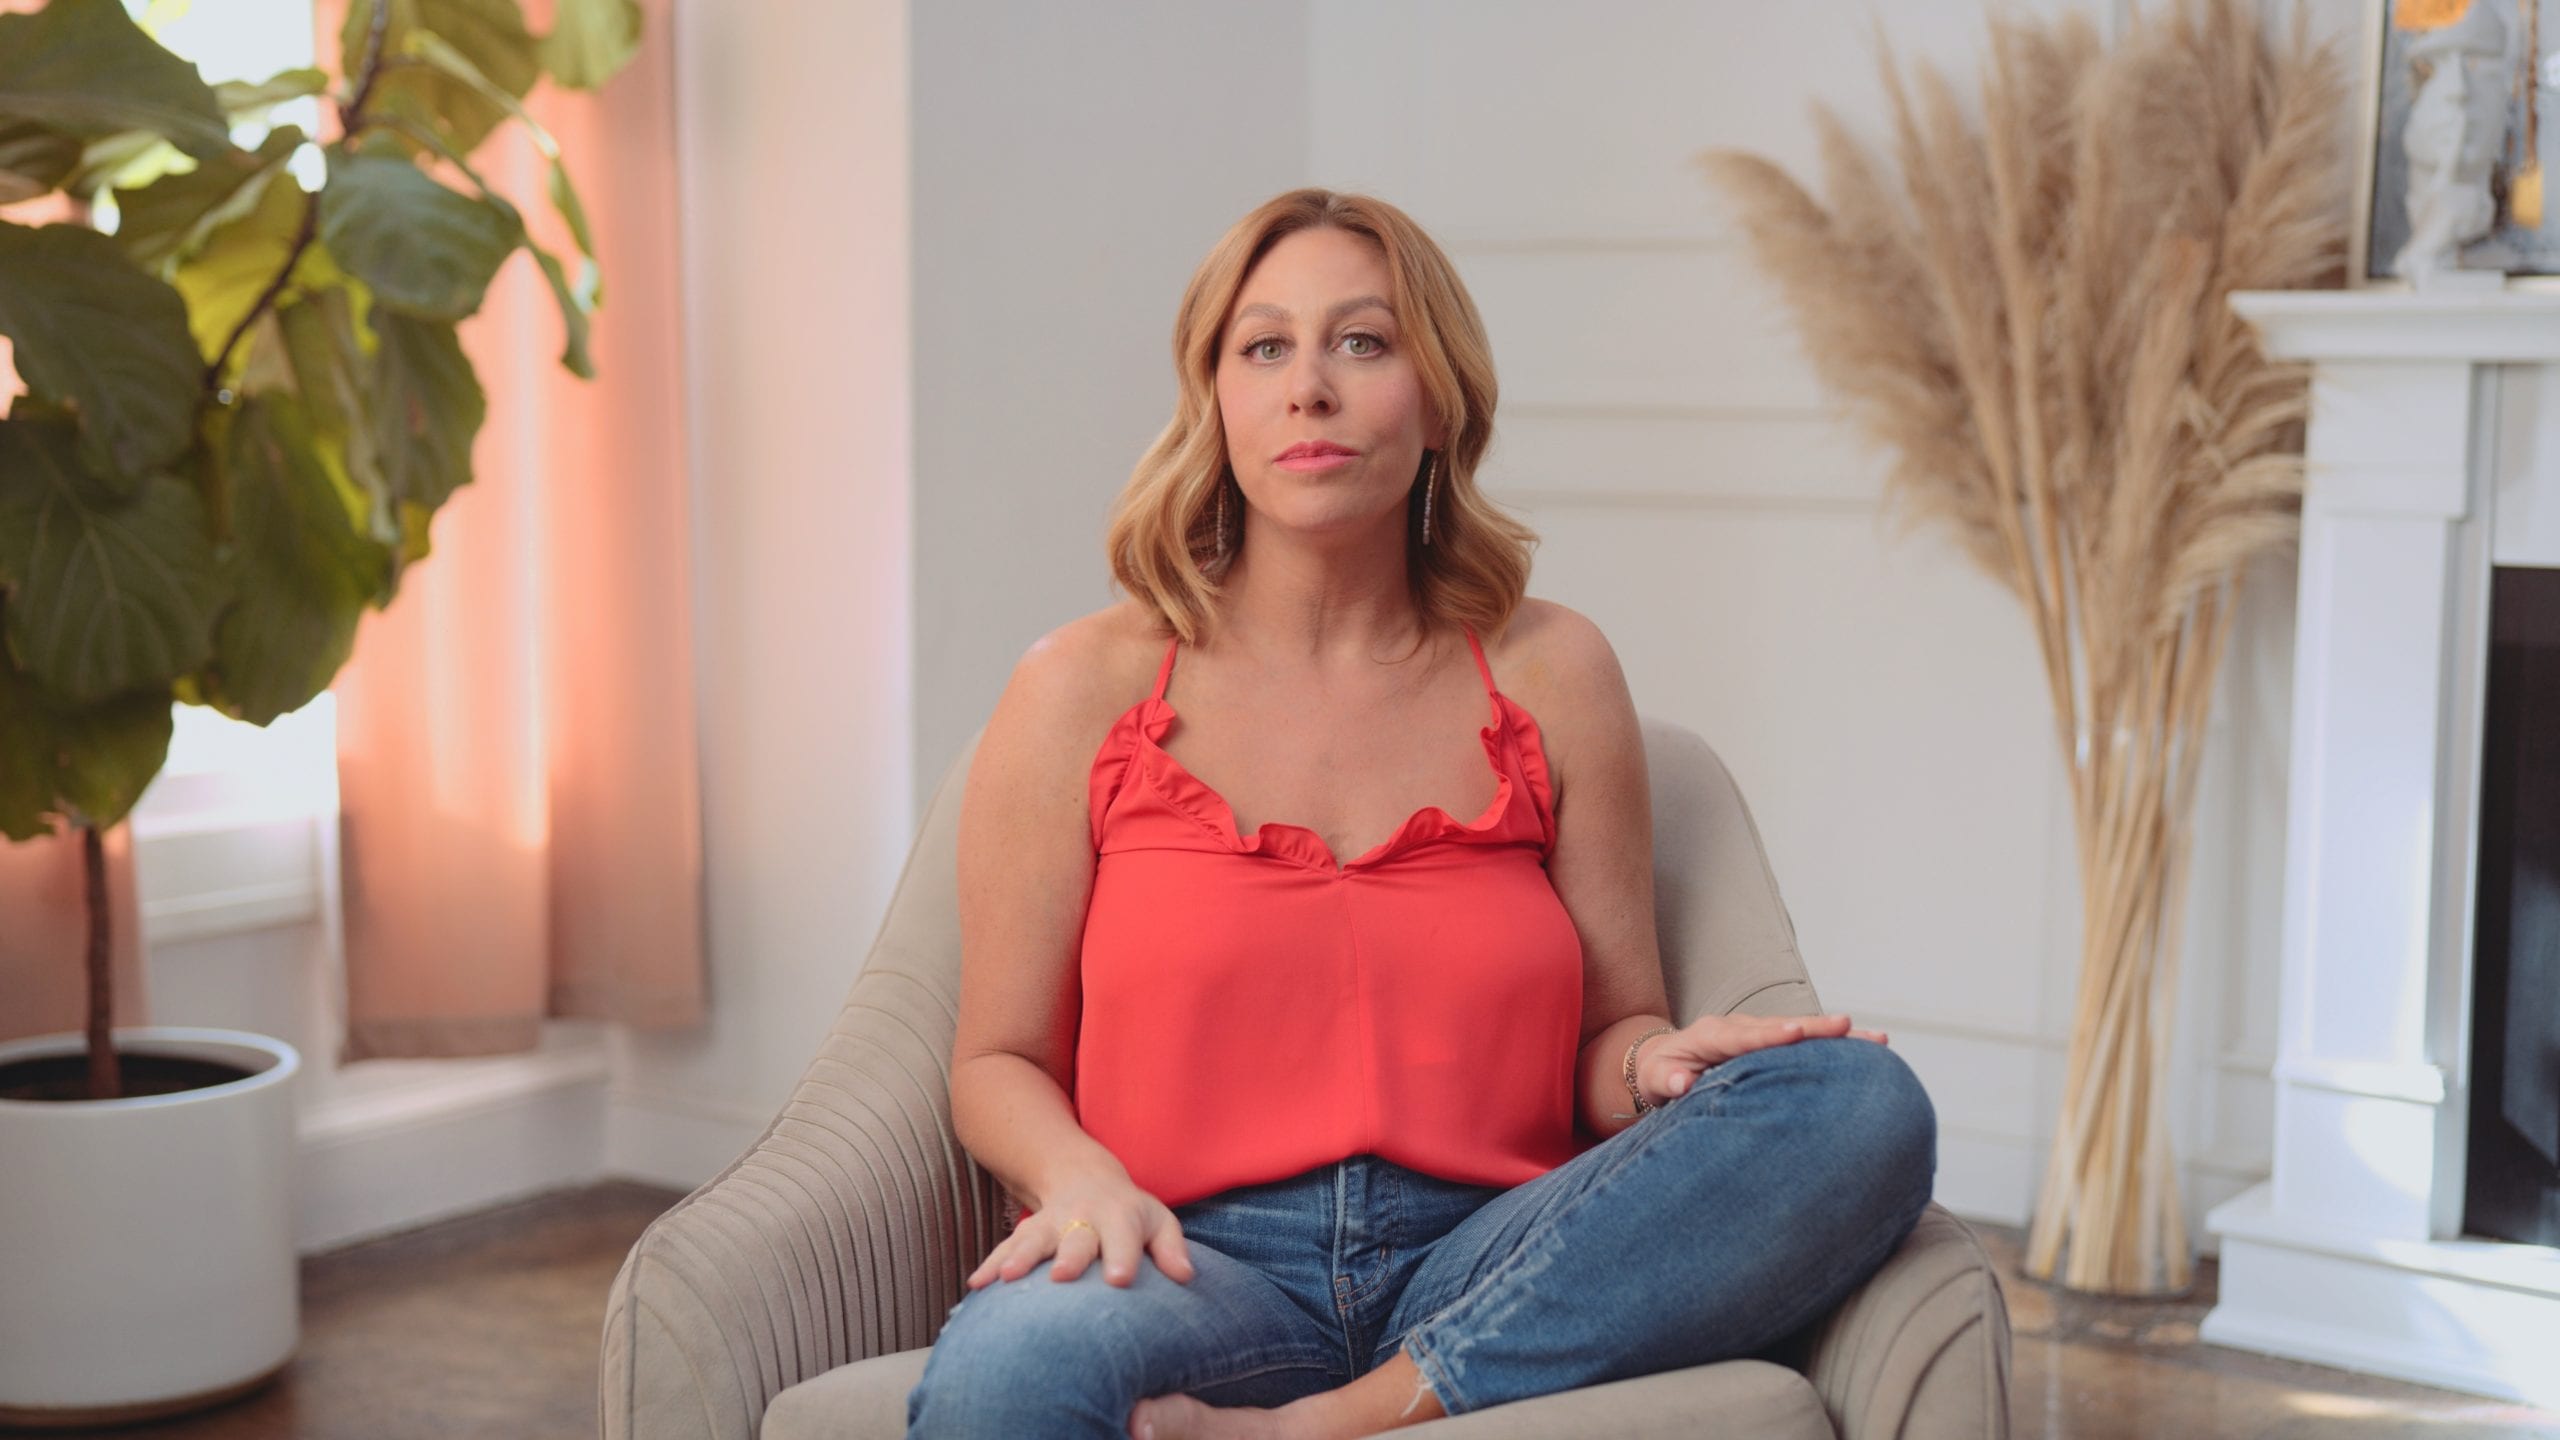 Woman with long blond hair wearing an orange top and jeans talking to camera sitting on a beige chair